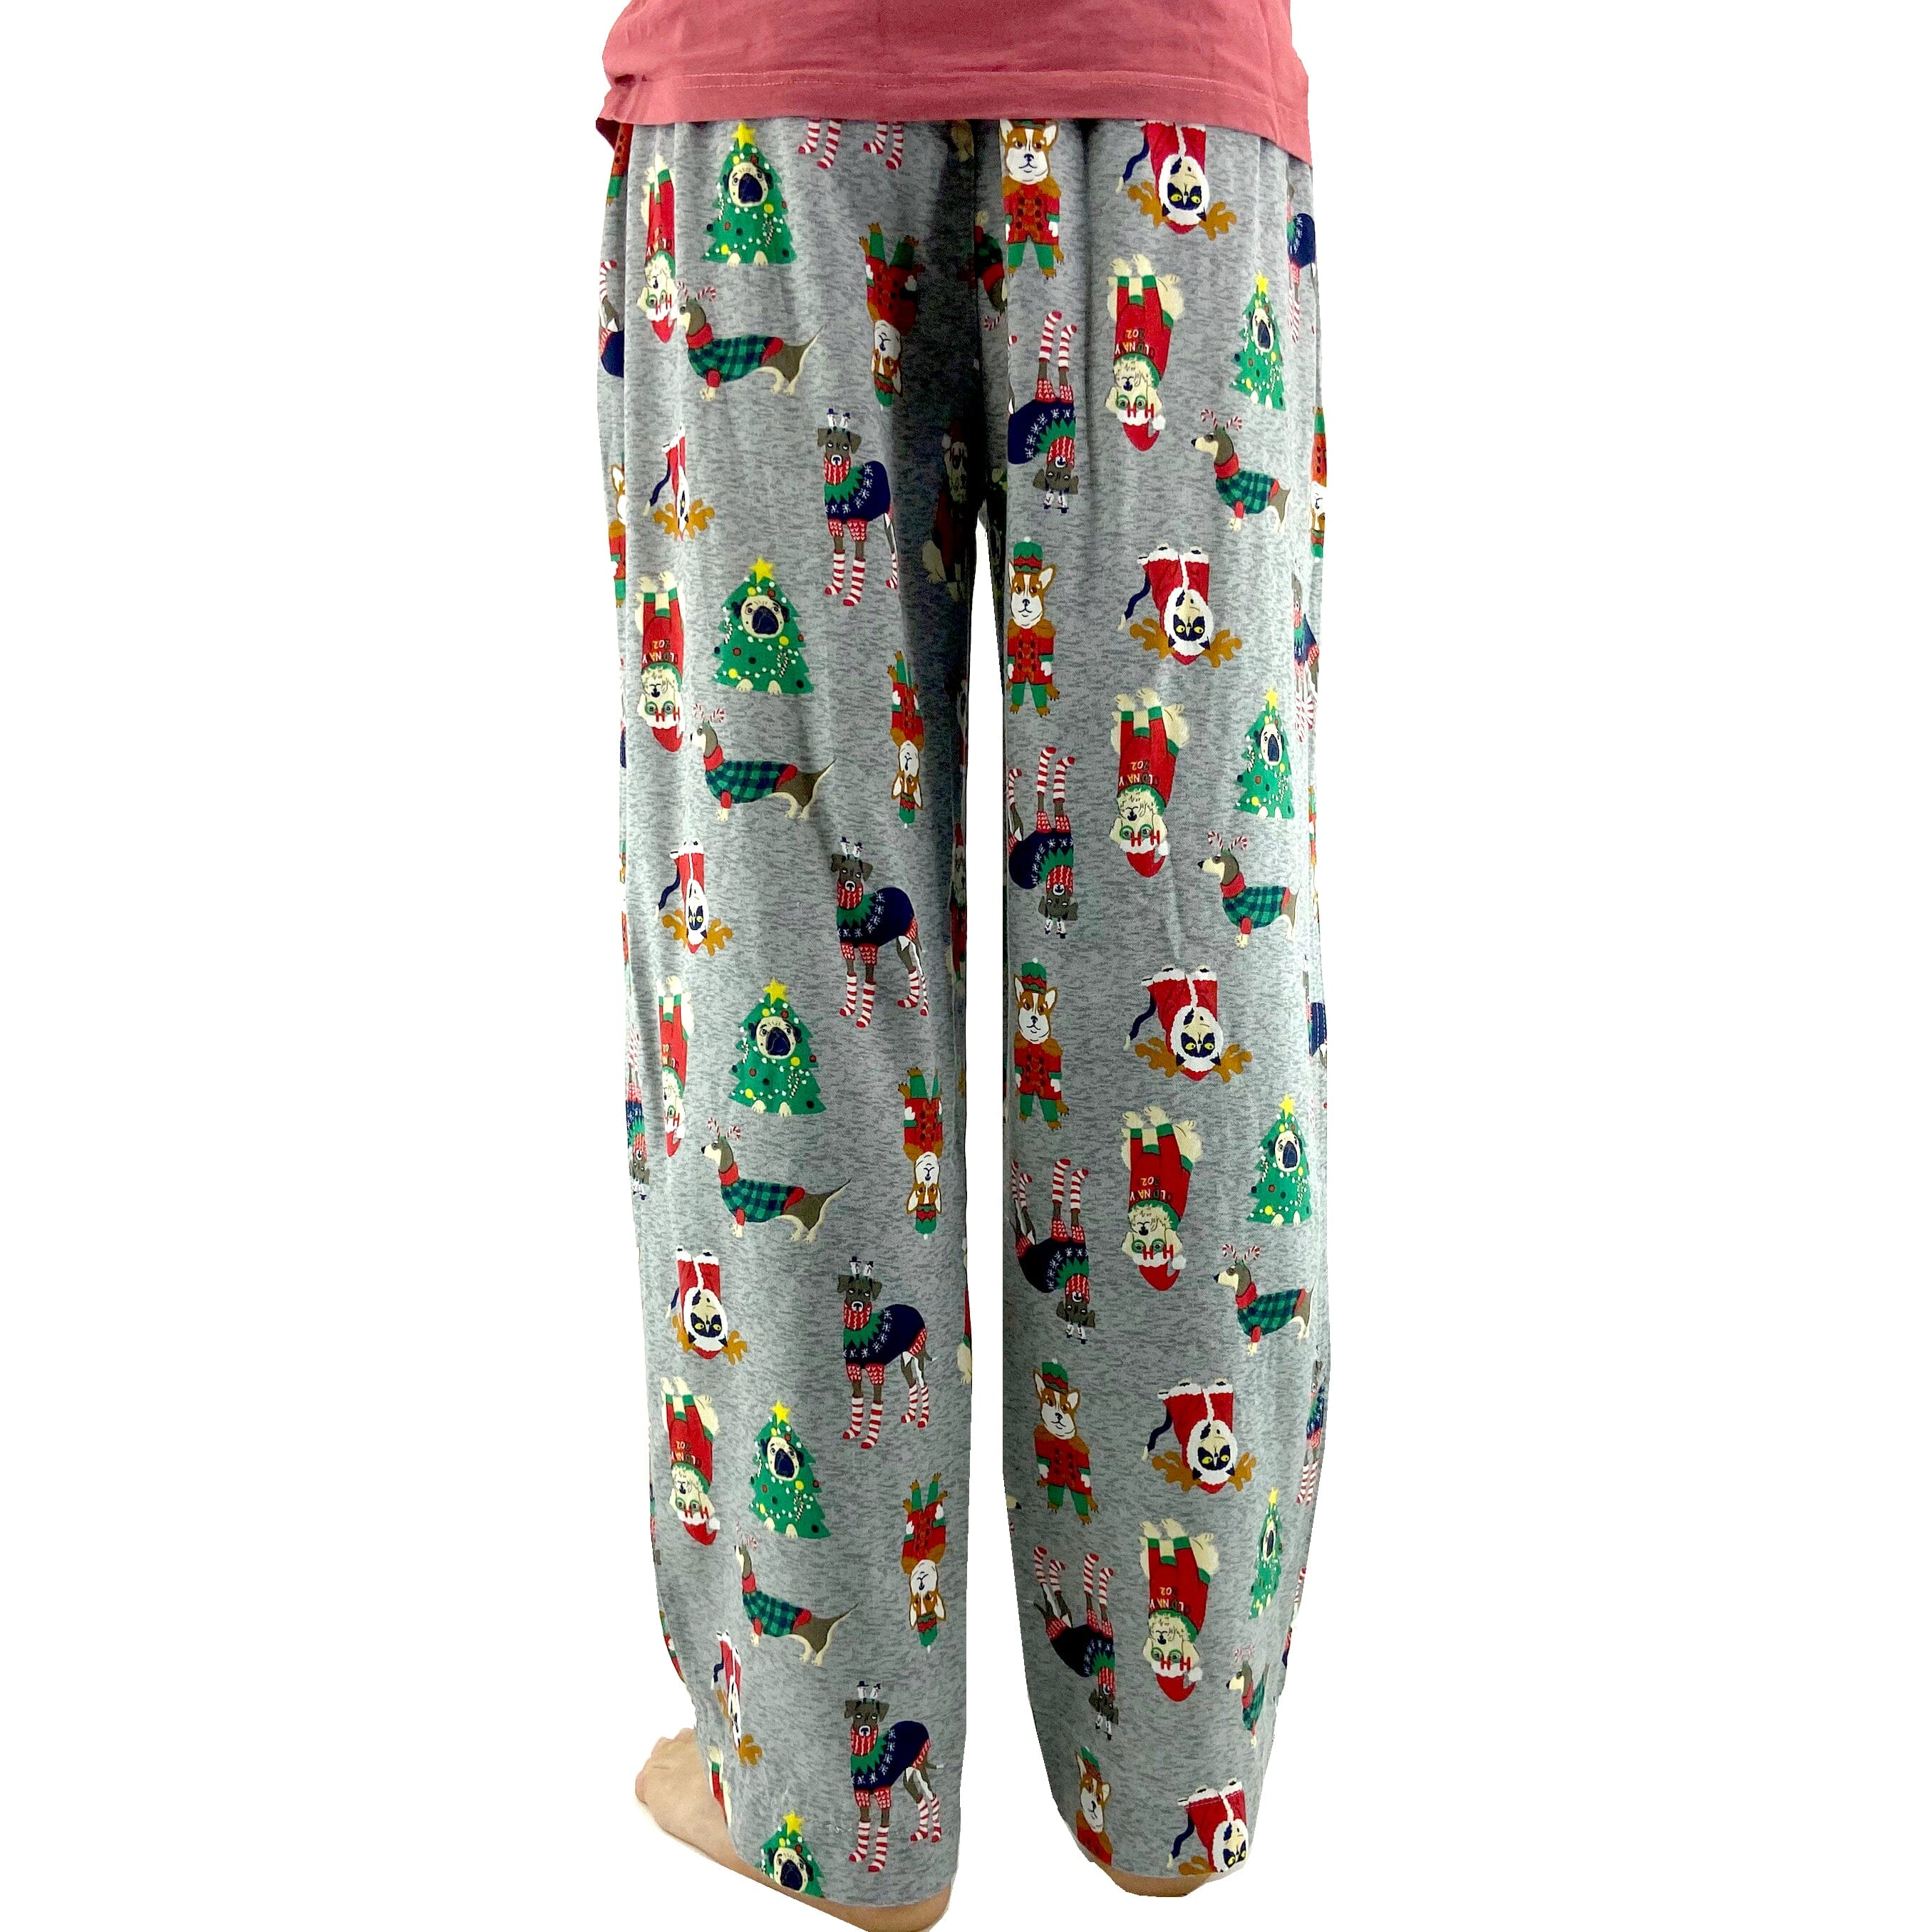 Men's Christmas Festive Cats and Dogs Patterned Long Pajama Pants